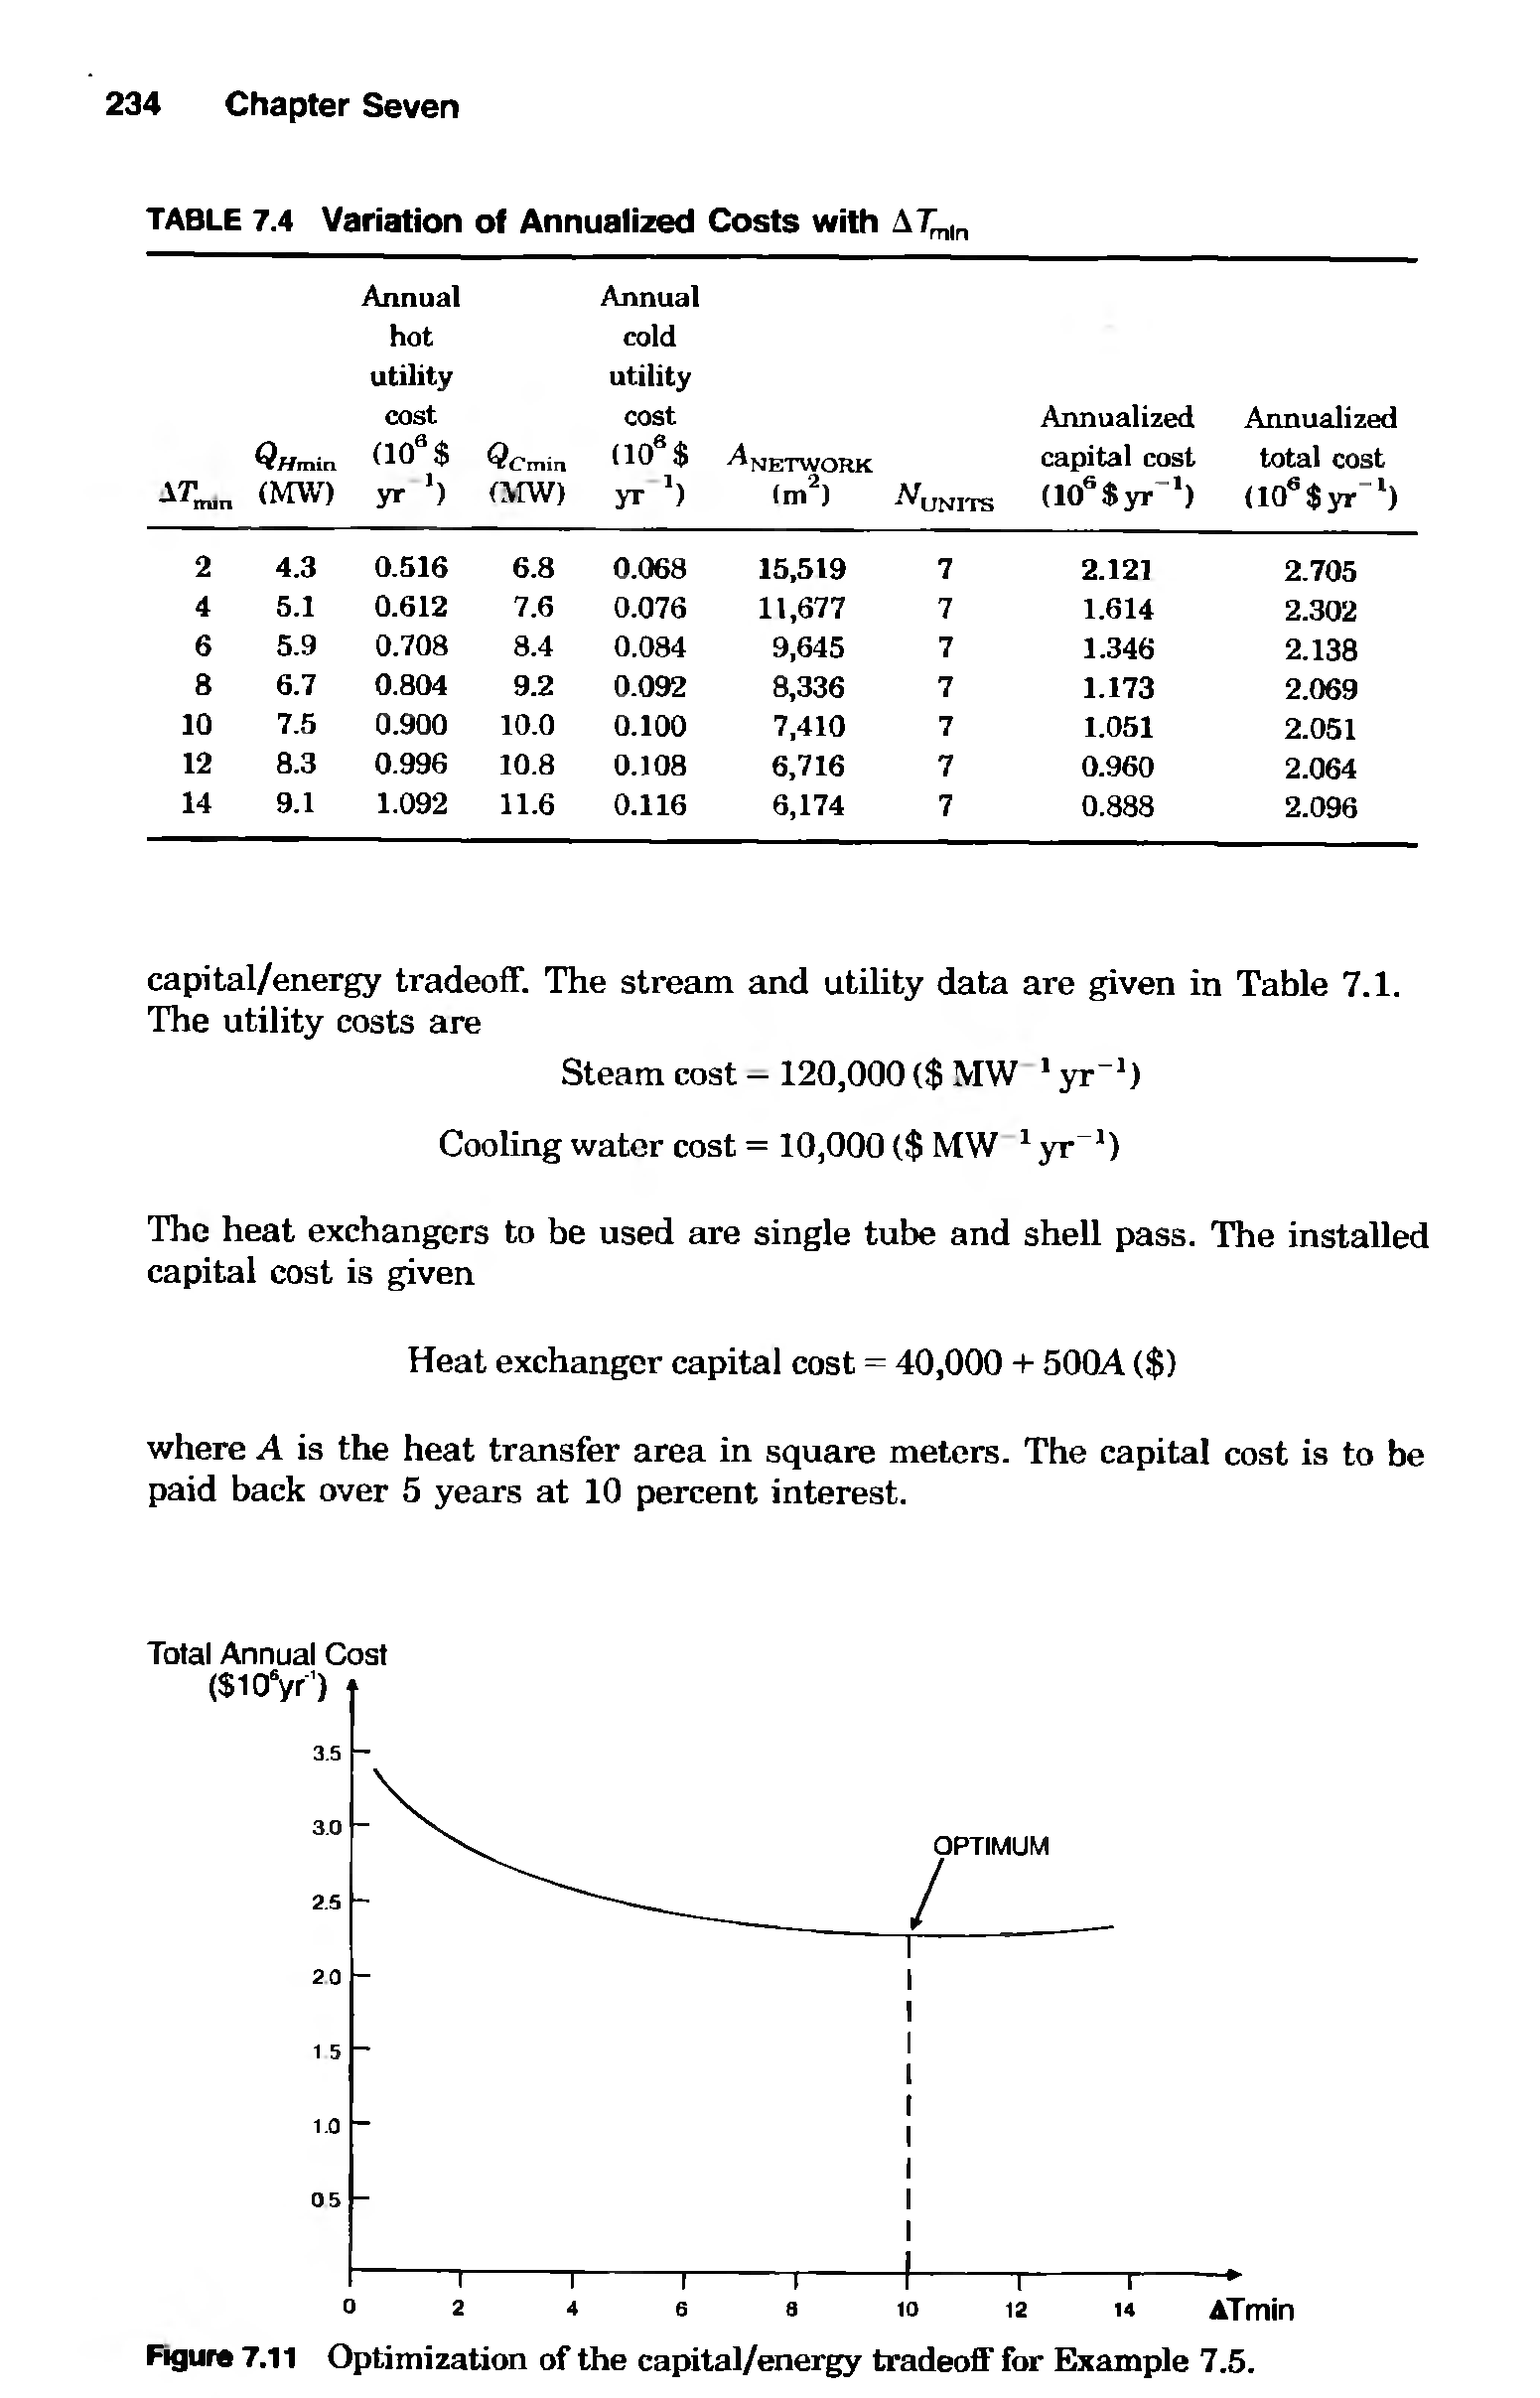 Figure 7.11 Optimization of the capital/energy tradeoff for Example 7.5.